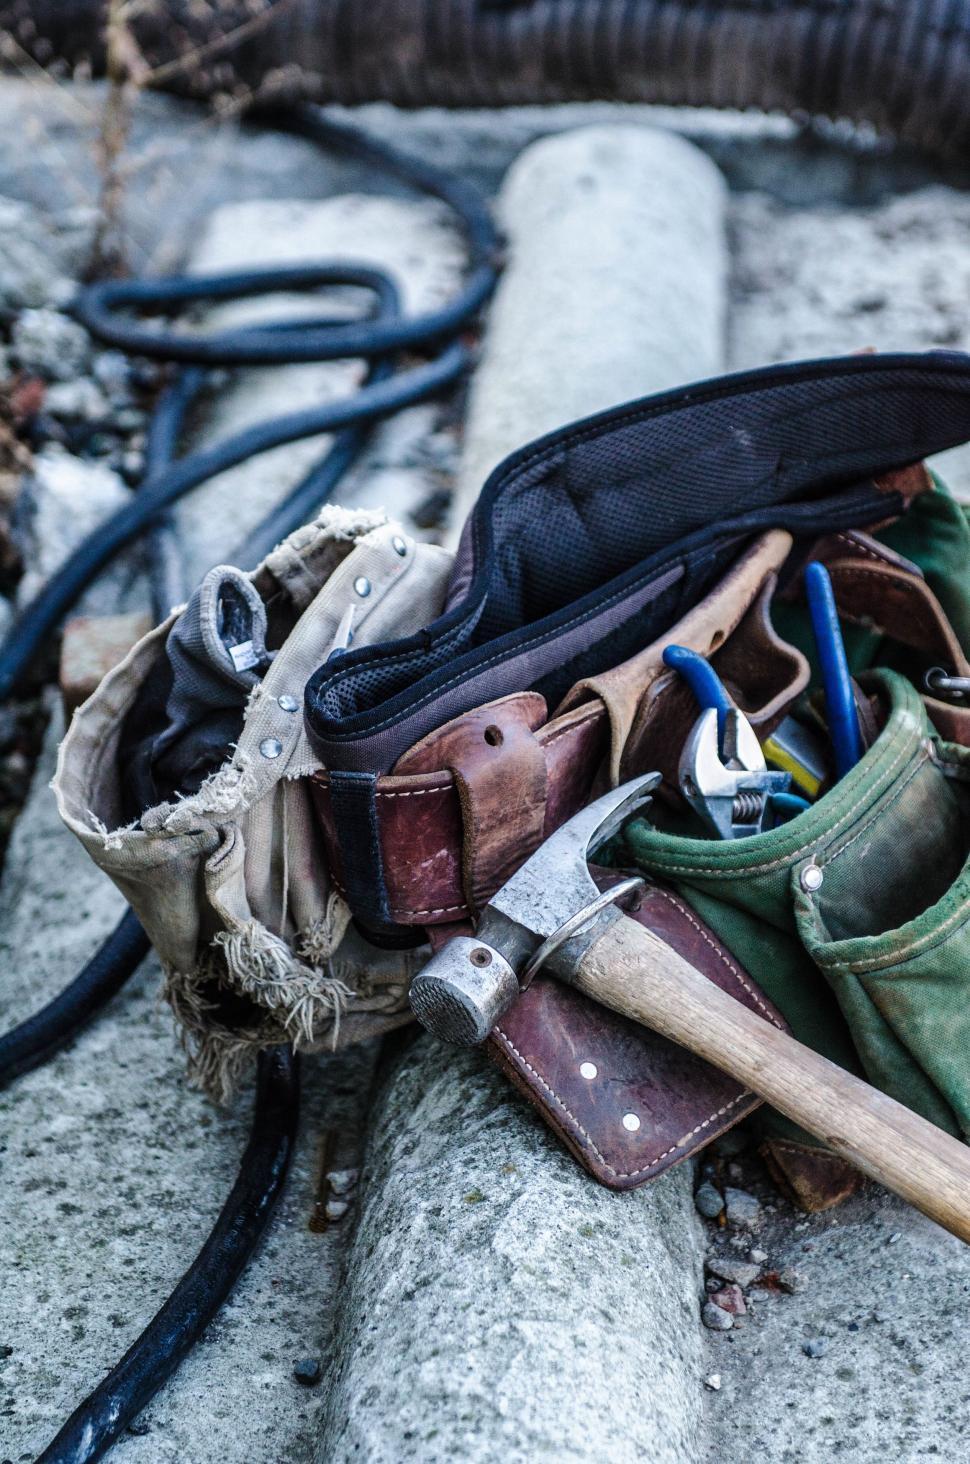 Free Image of Pile of Tools on Cement 